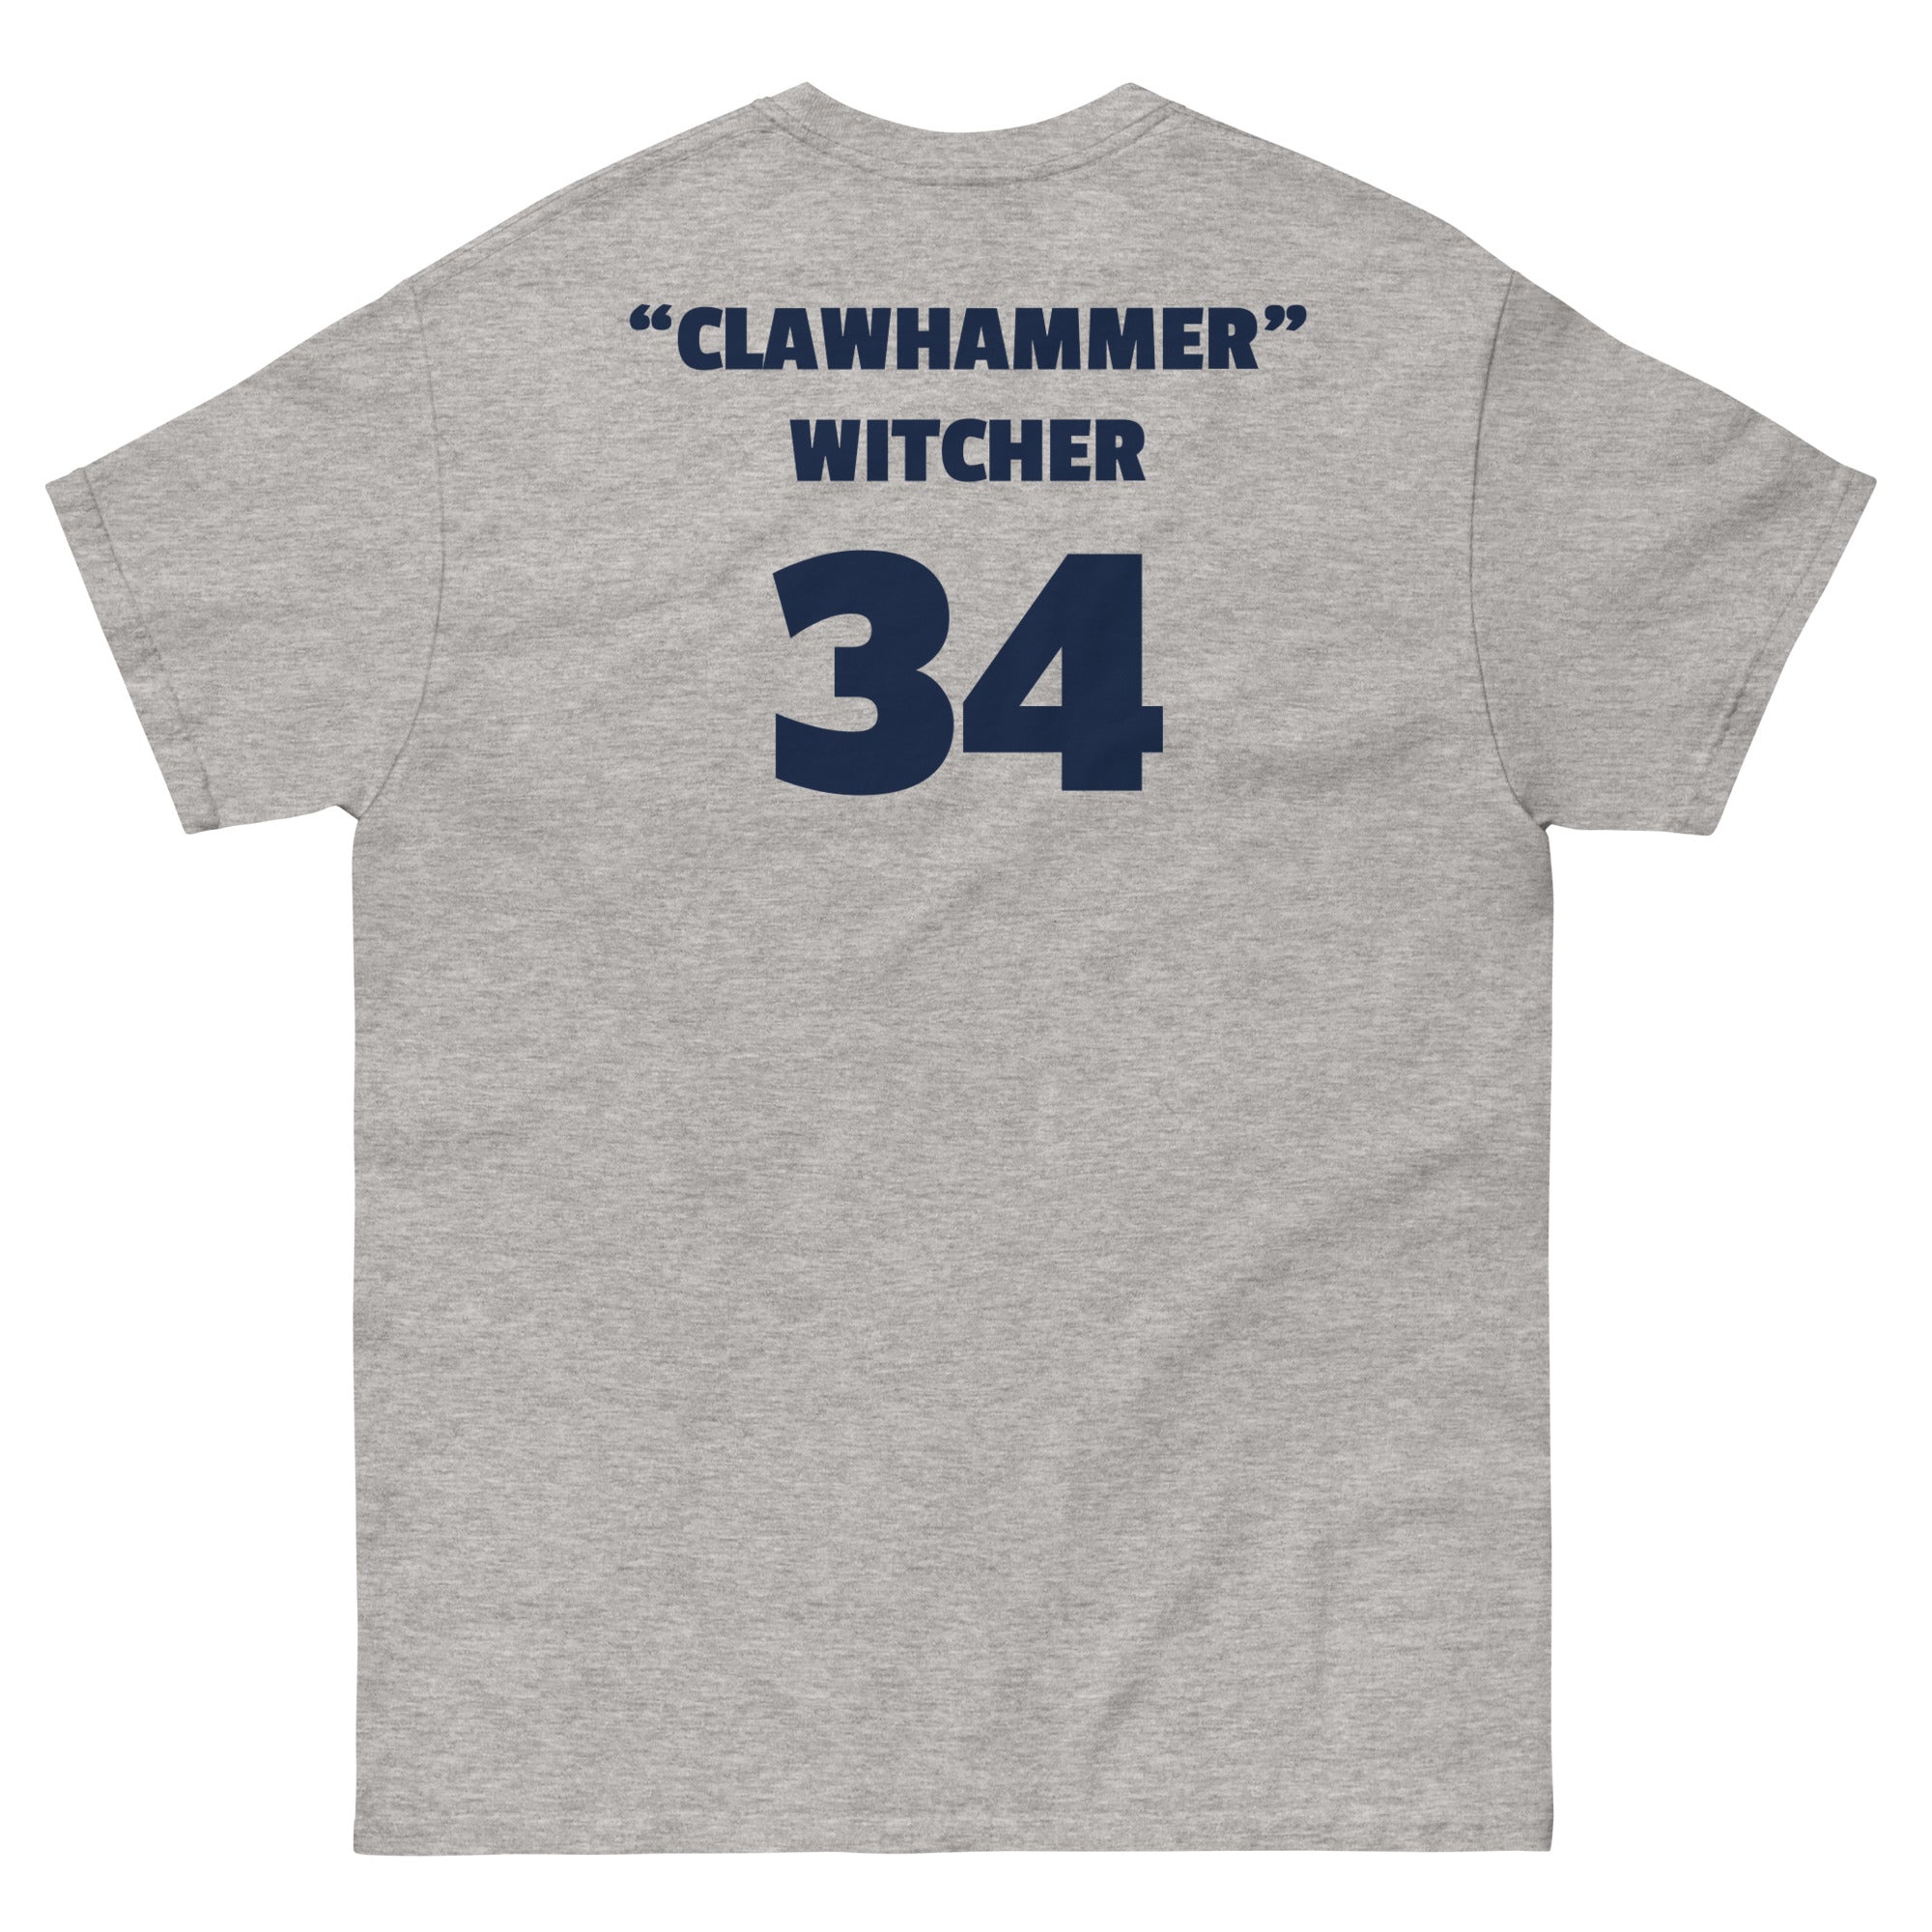 "Clawhammer" Witcher #34 - The Battle of Gettysburg Podcast Jersey Collection